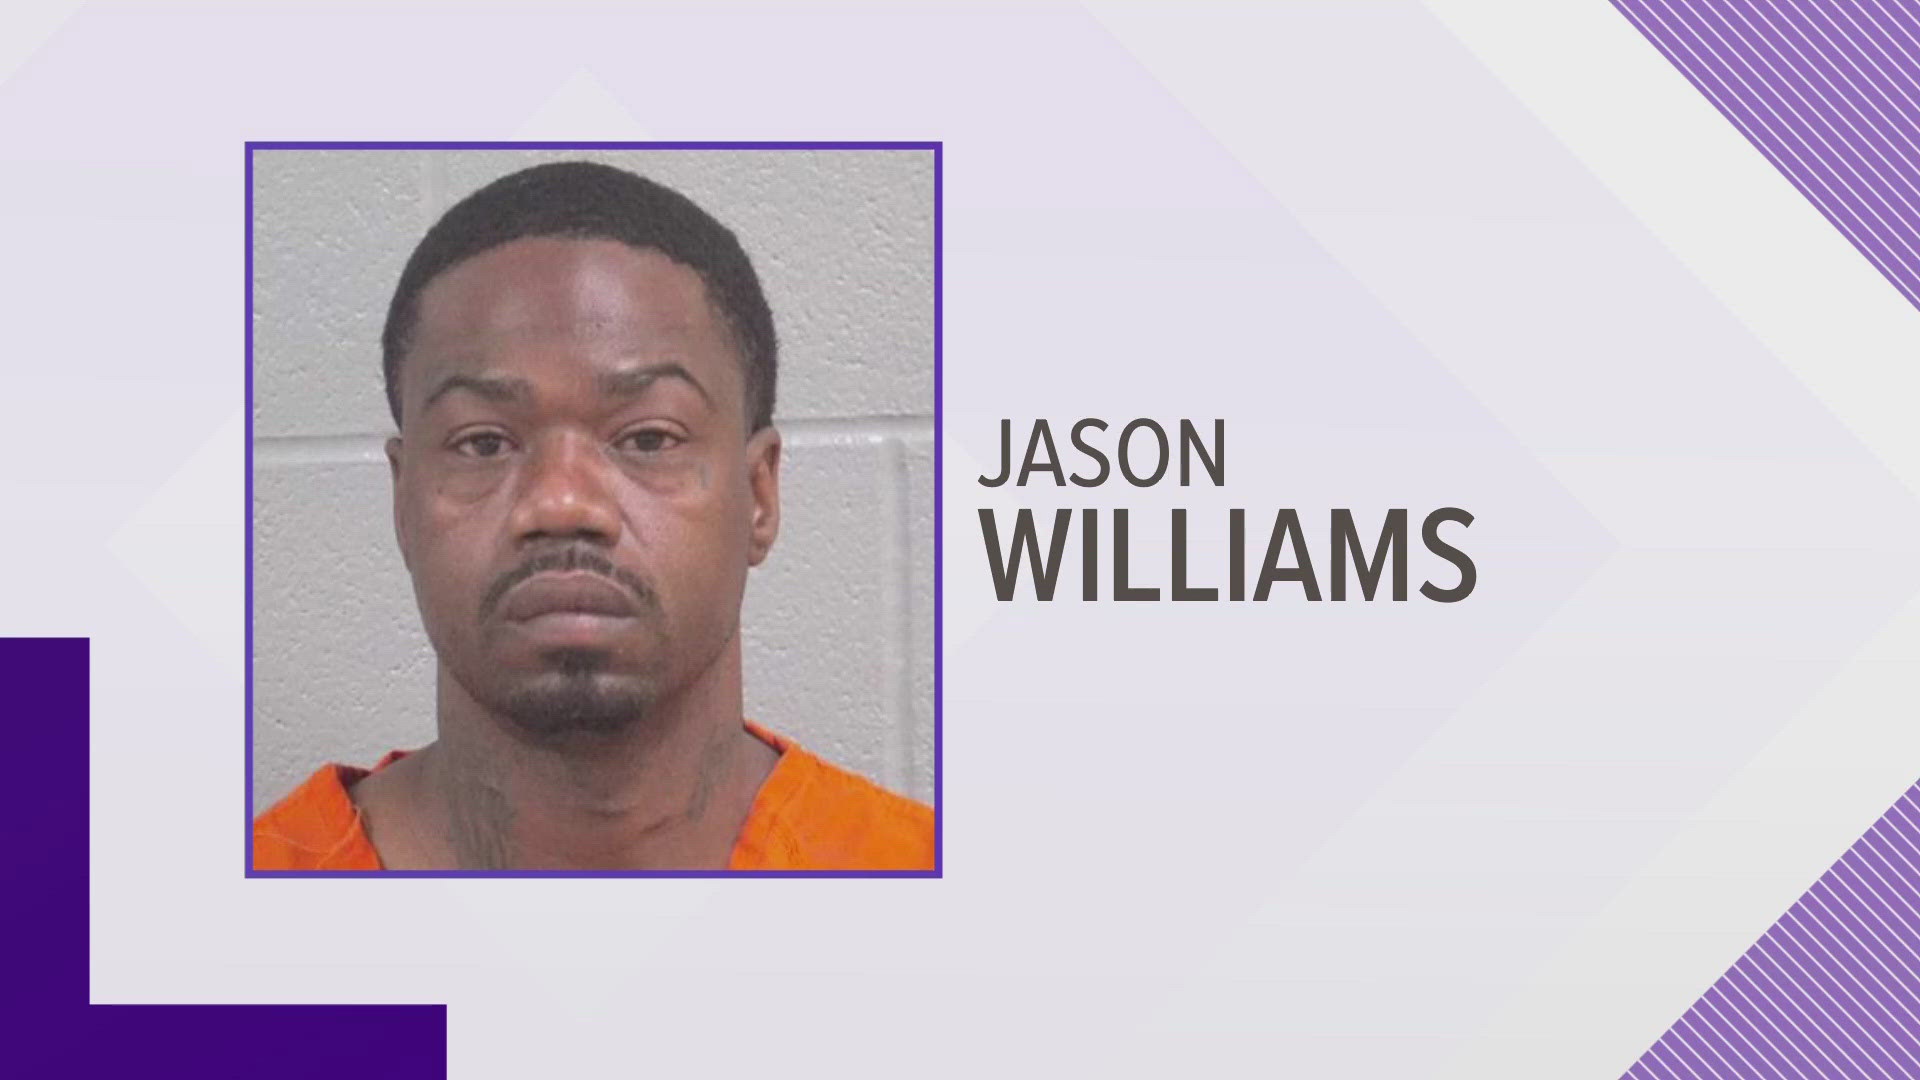 According to the City of Midland, 40-year-old Jason Williams slammed the door on officers and threatened them with a knife and gun.